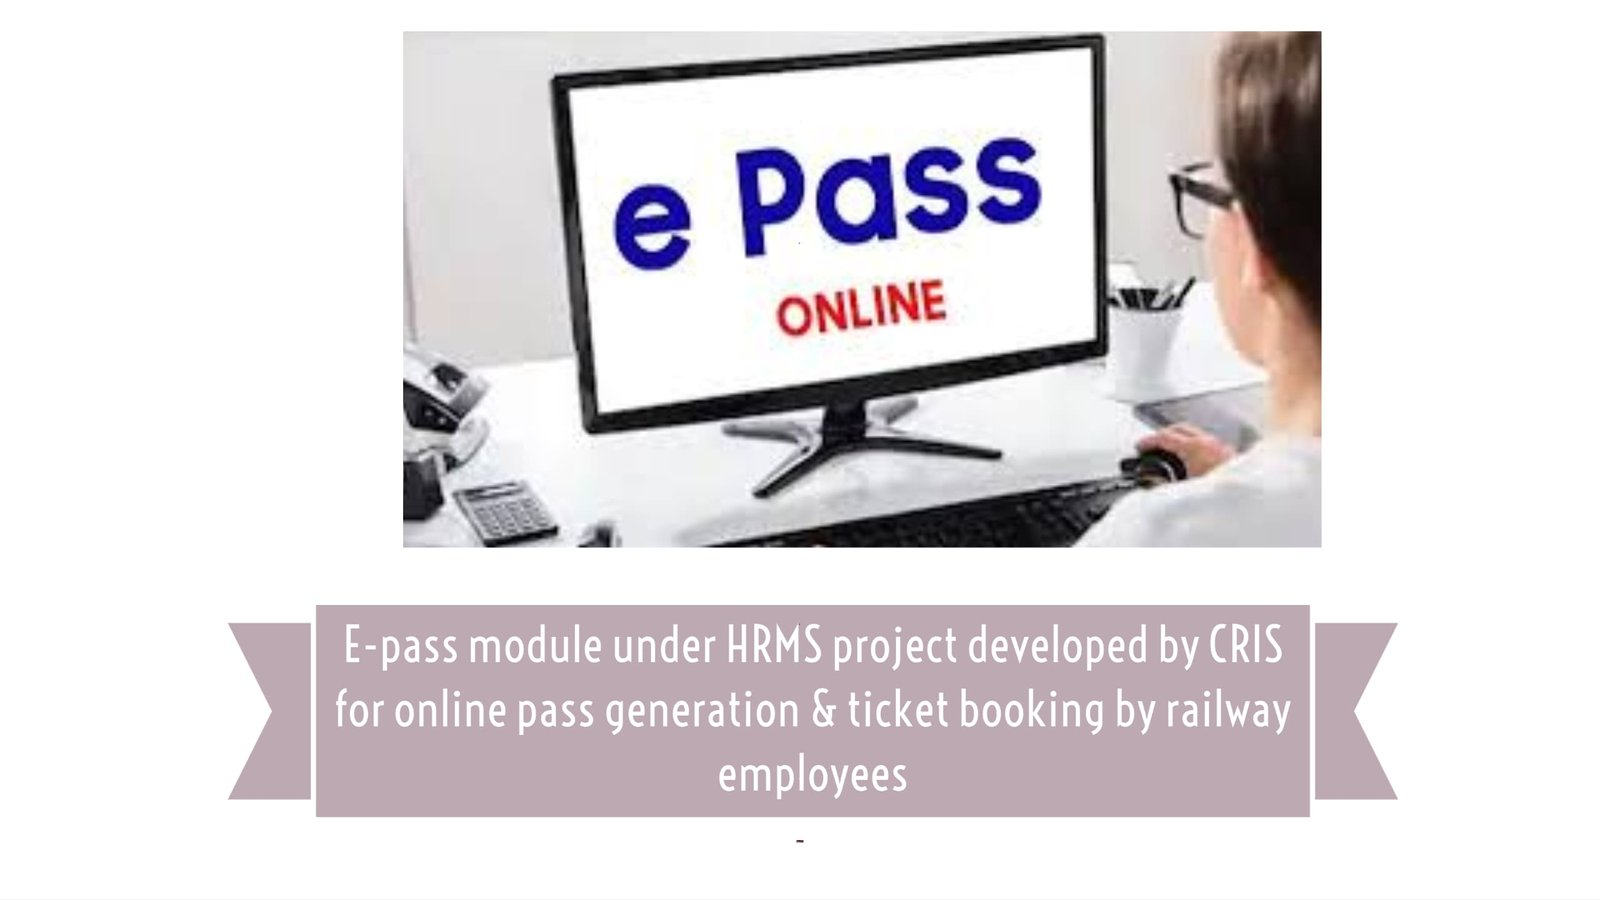 E-pass module under HRMS project developed by CRIS for online pass generation & ticket booking by railway employees